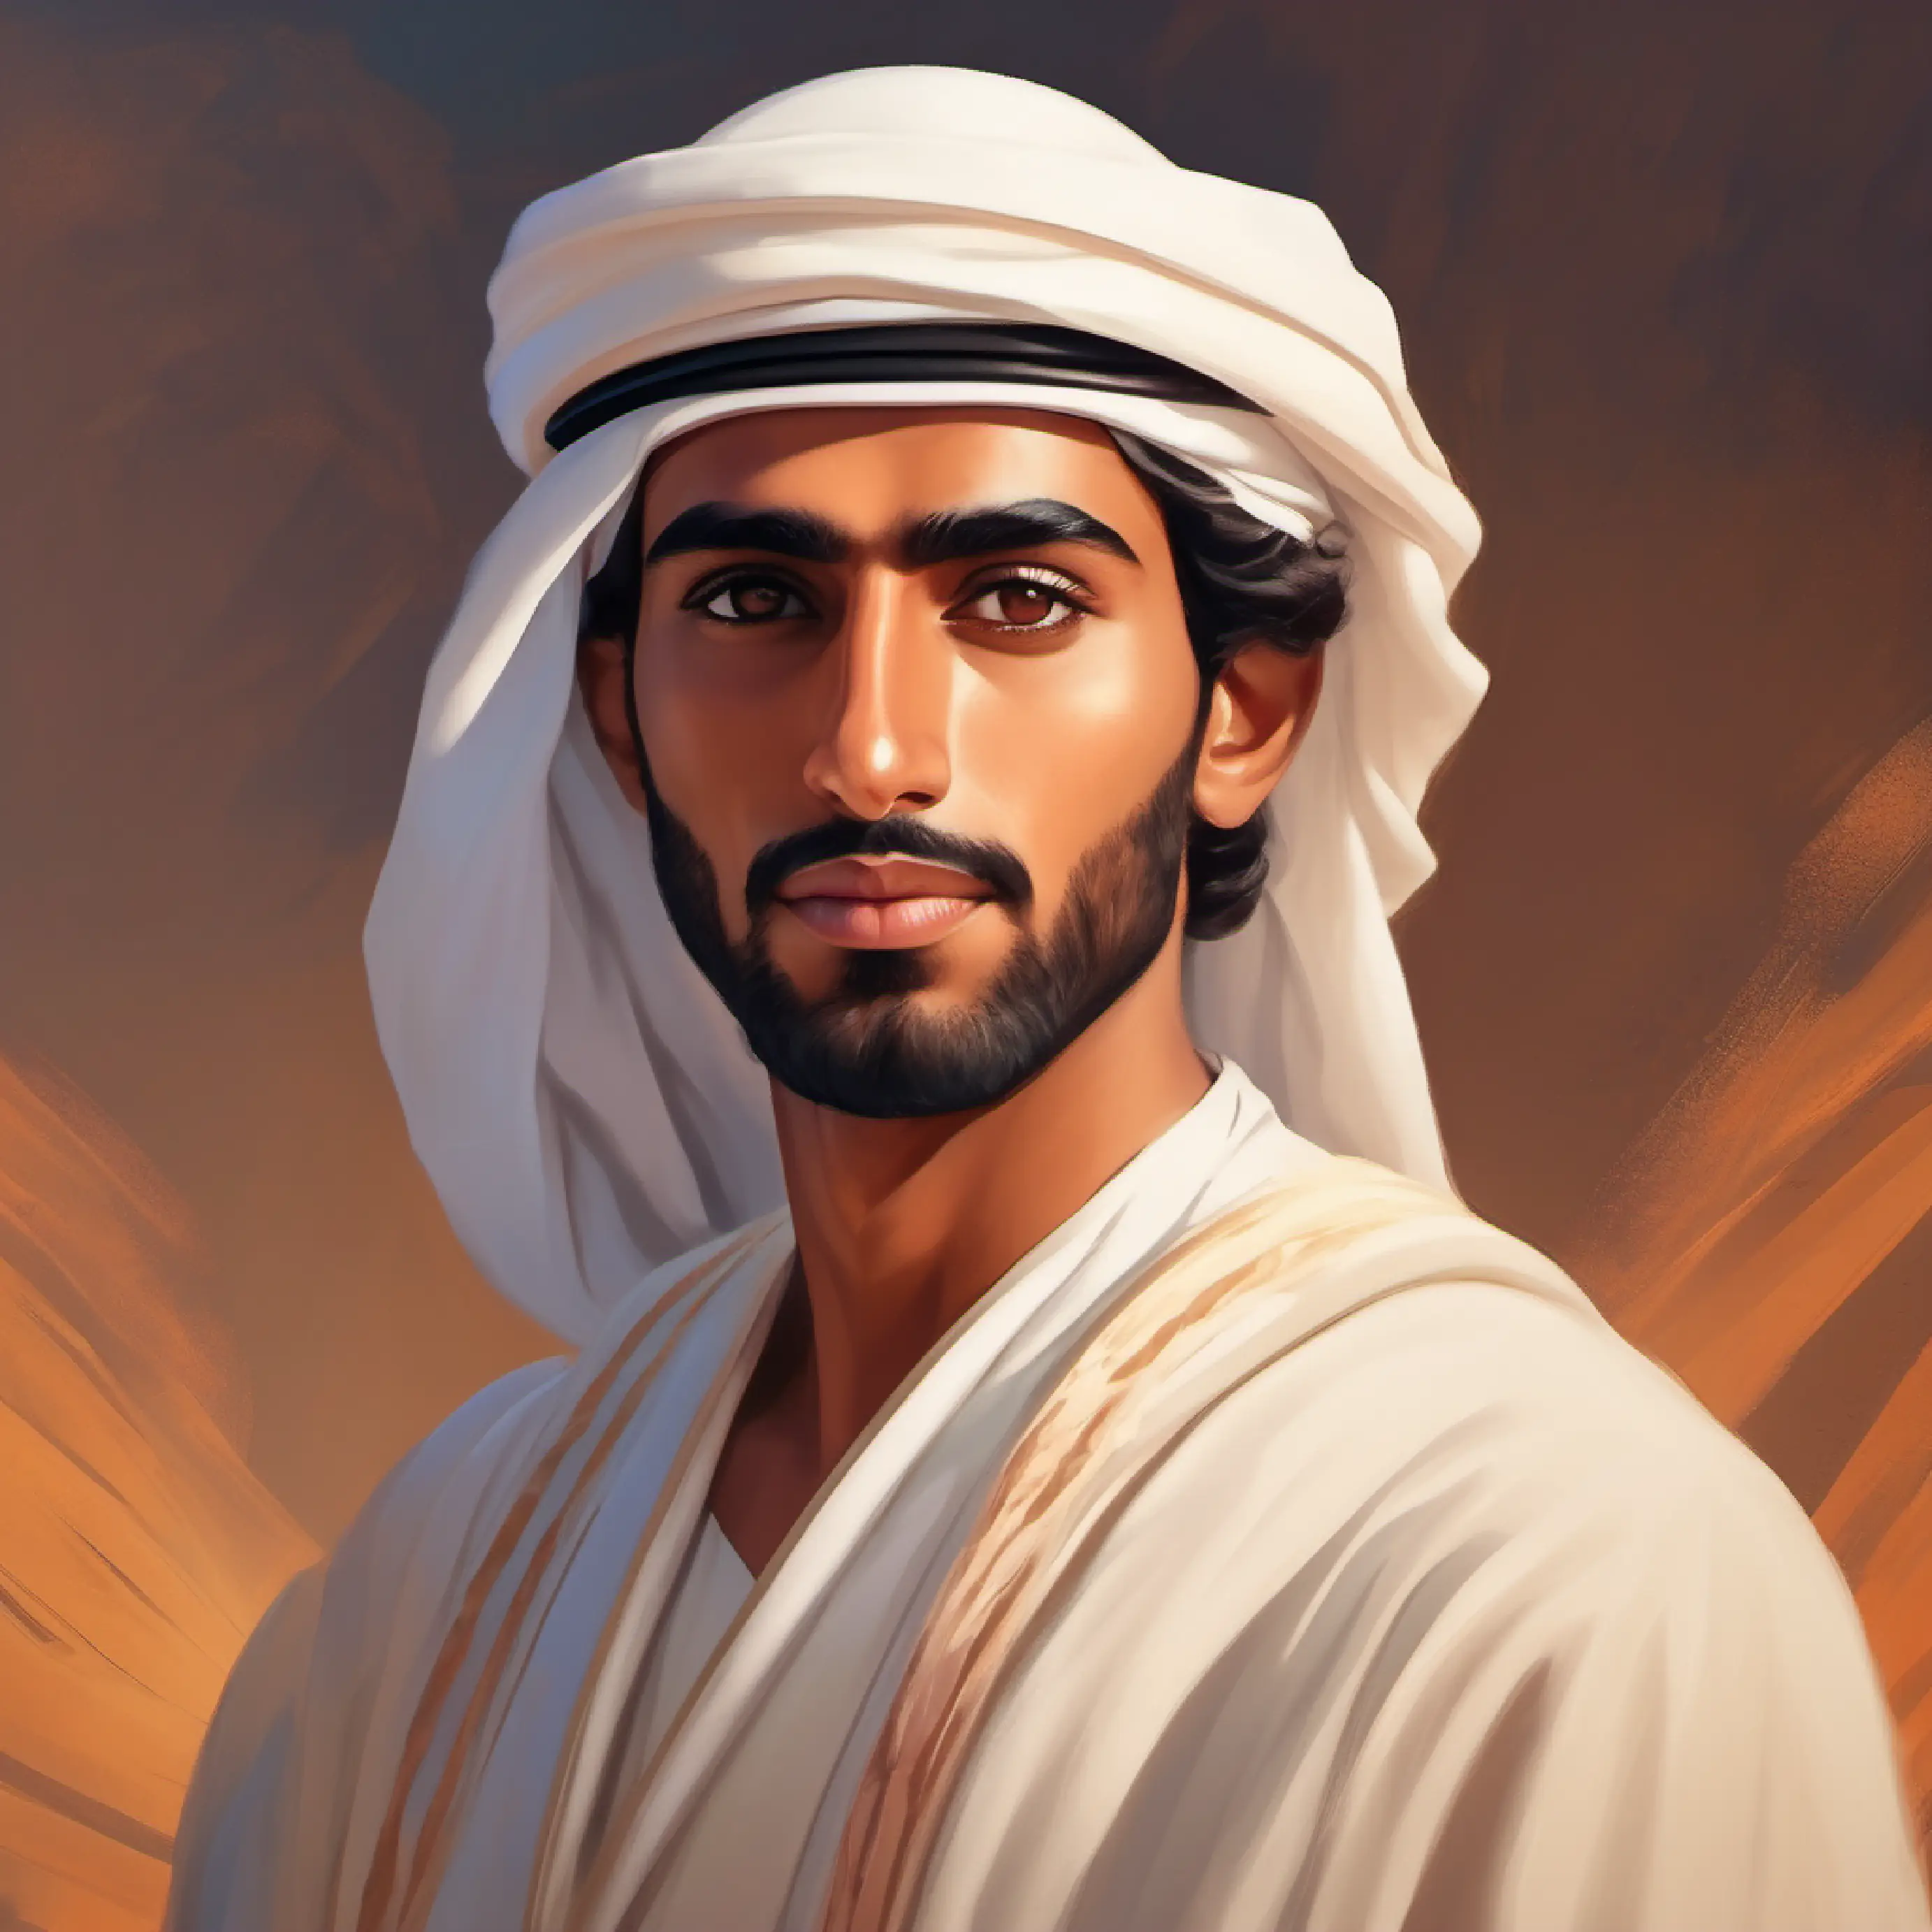 Young Emirati man, bronze skin, earnest dark eyes, with a scientific gaze reflects on his journey and the fused wisdom of science and heart.